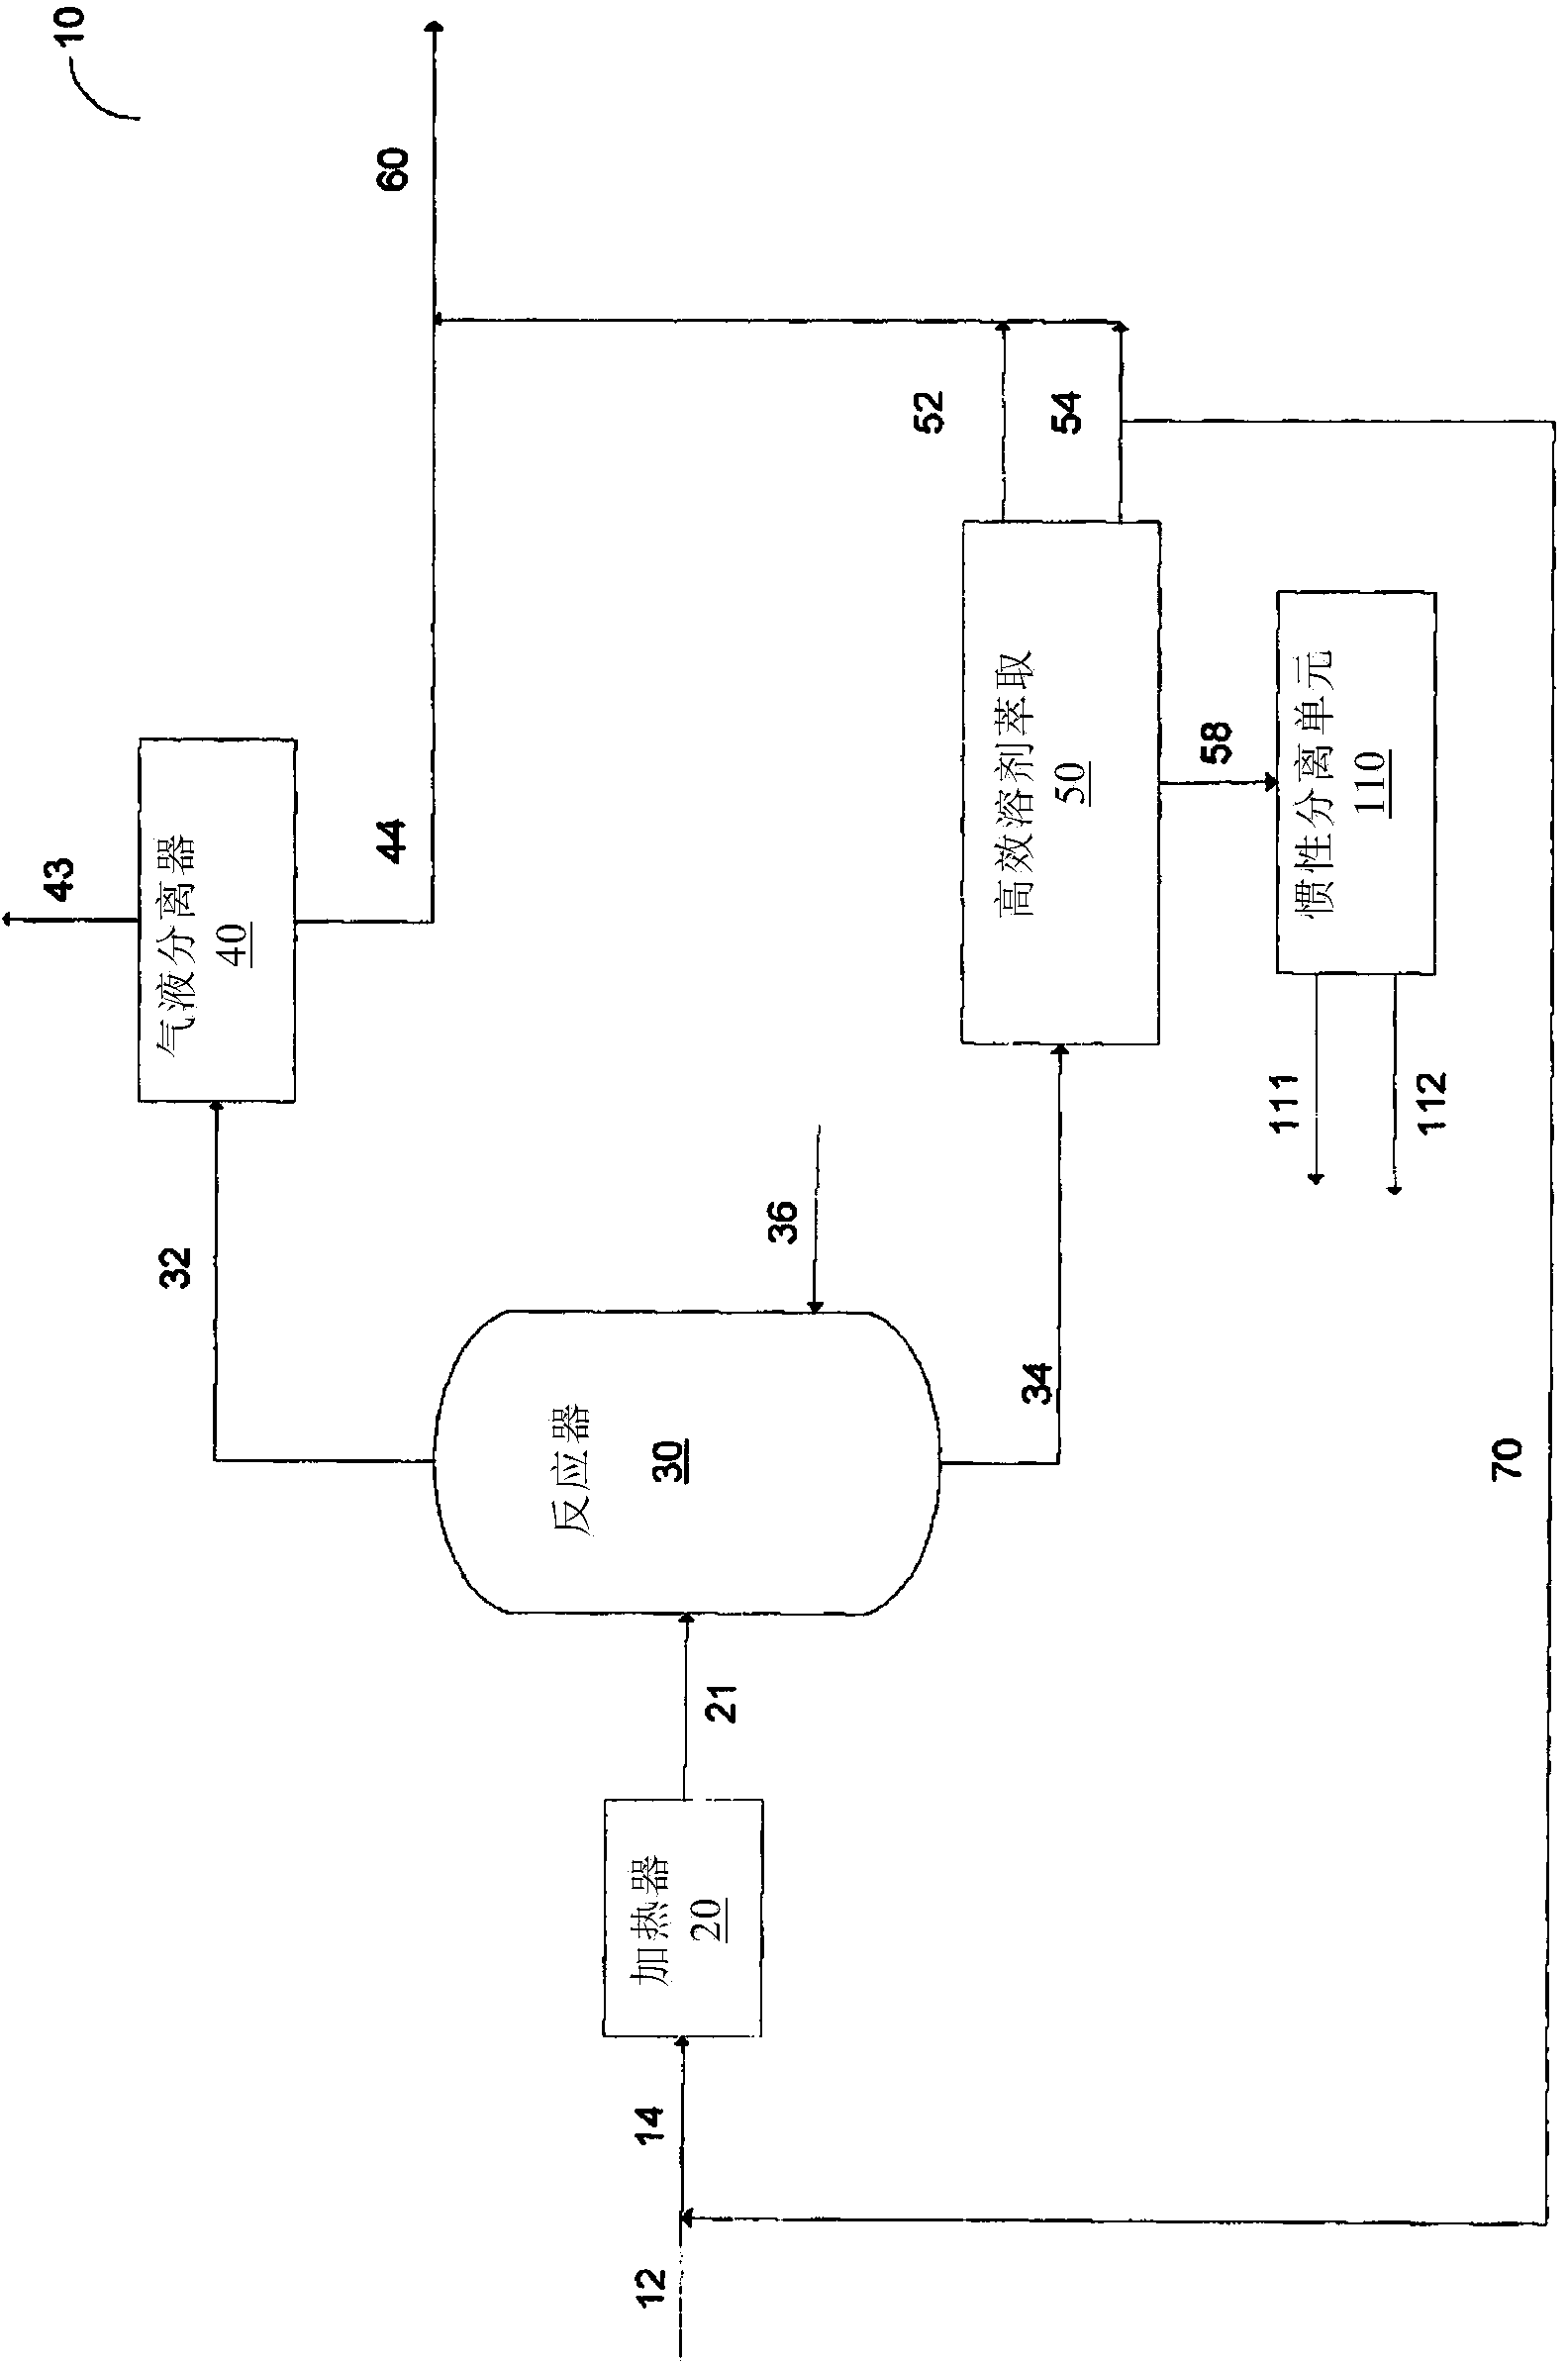 Solvent de-asphalting with cyclonic separation